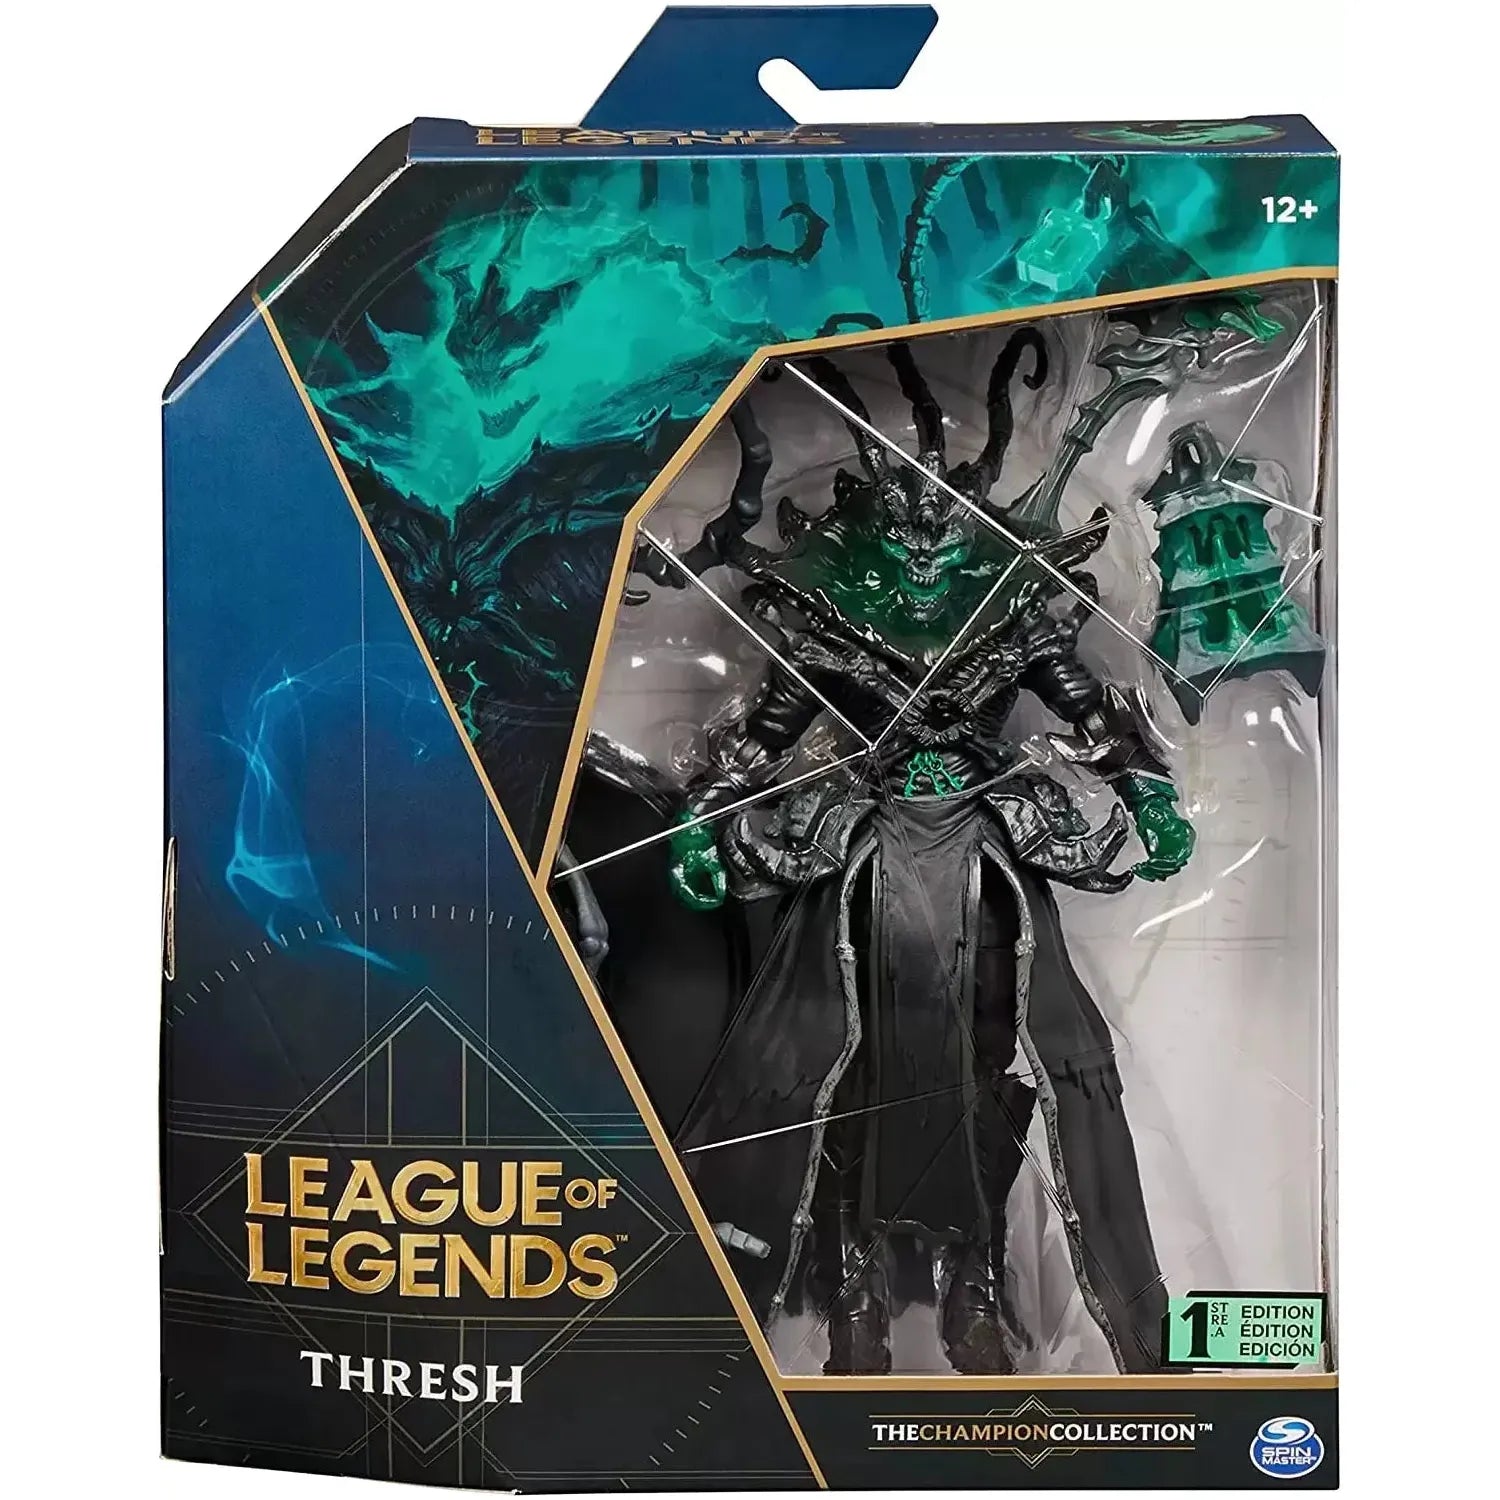 League of Legends Thresh Figure The Champion Collection